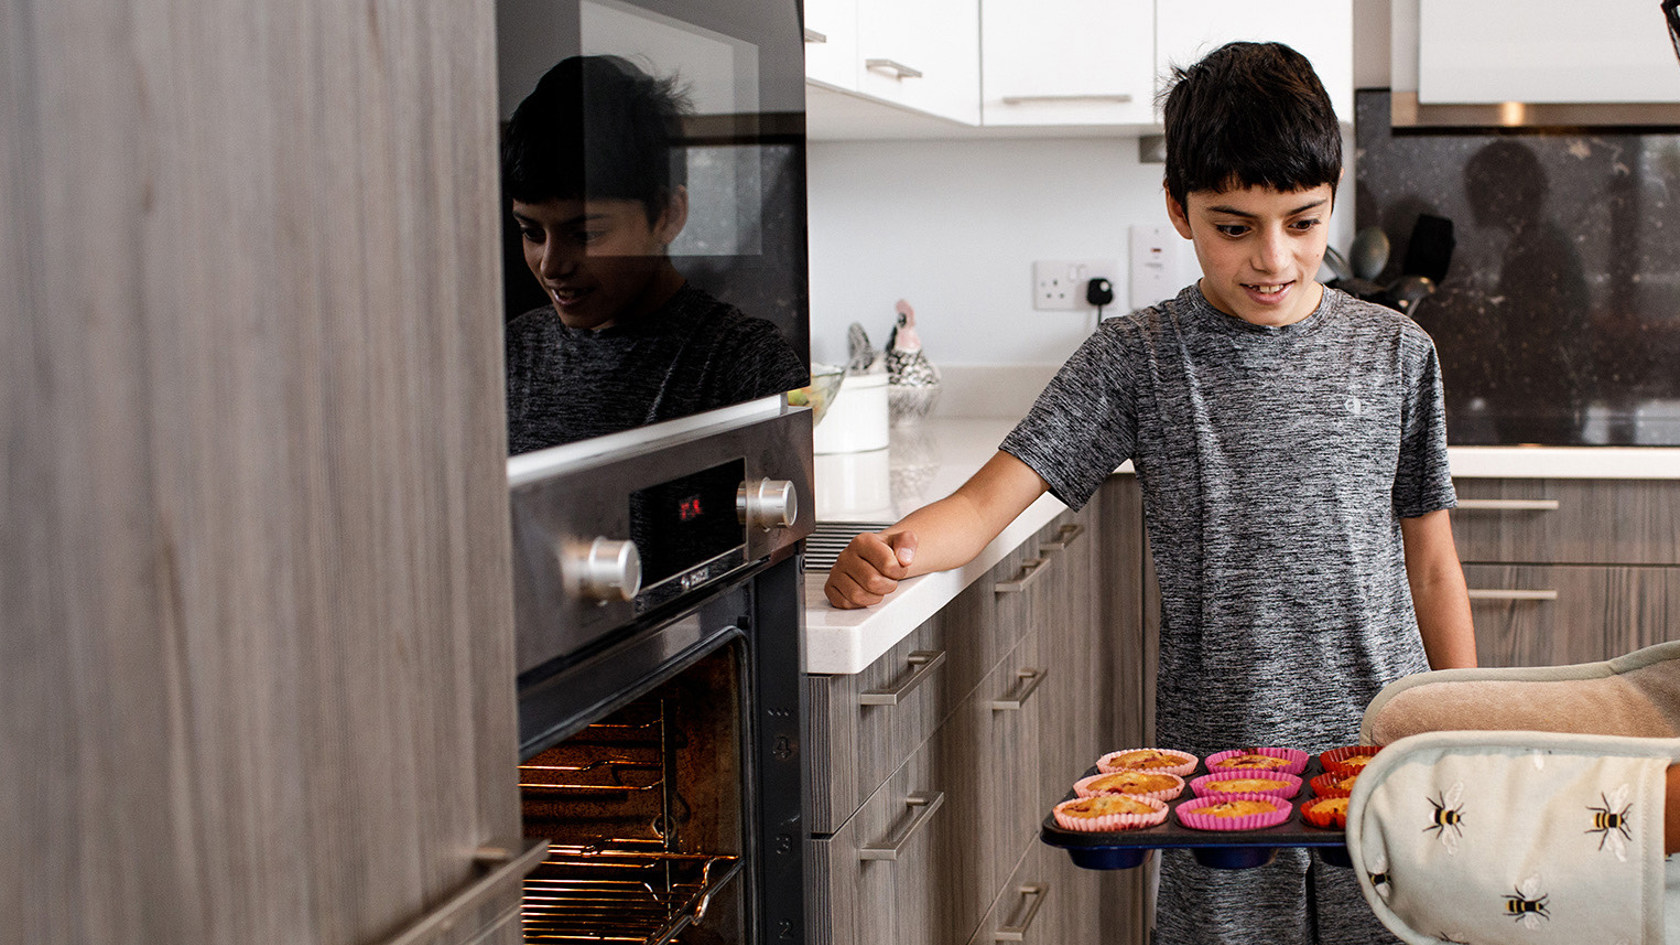 A mother removes her cupcakes from her electric oven as her son looks on.